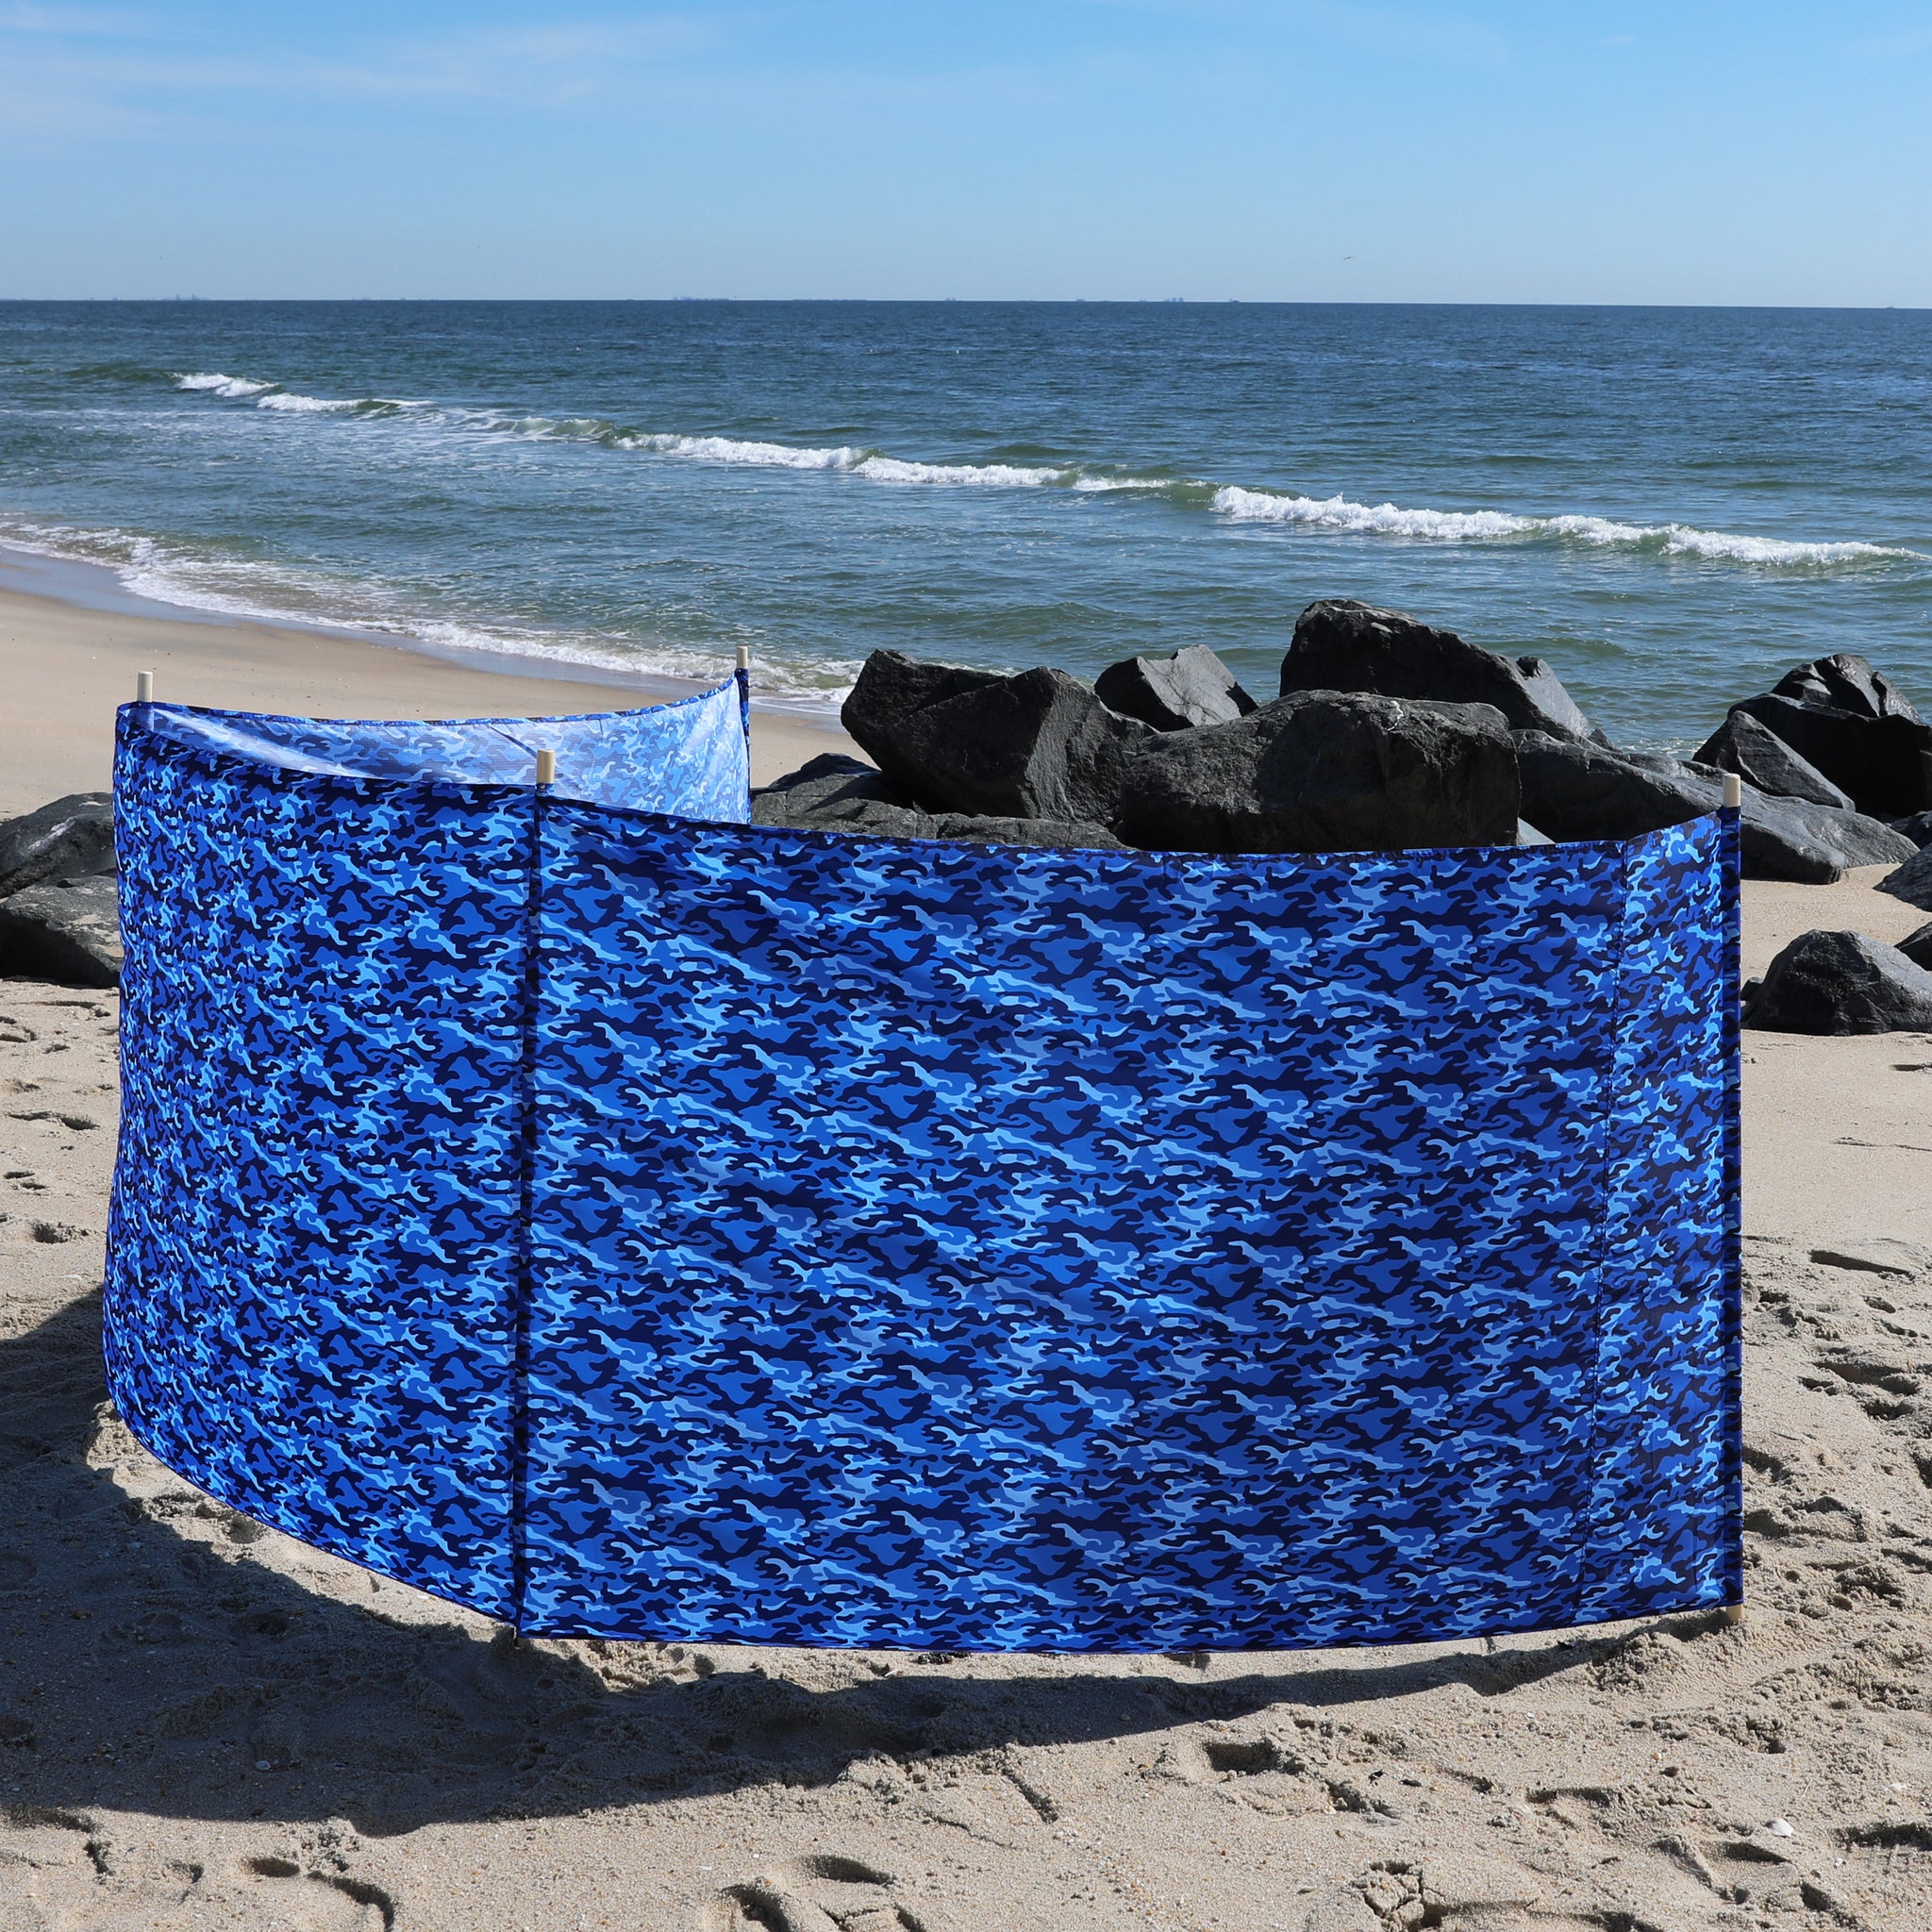 Ocean Camo Elite Beach Recycled Polyester Rip-Stop Extra Tall 42" Lightweight Windscreen, Privacy Screen, Wind Blocker, Free Matching Shoulder Bag (NEW MAHOGANY WOOD POLES)